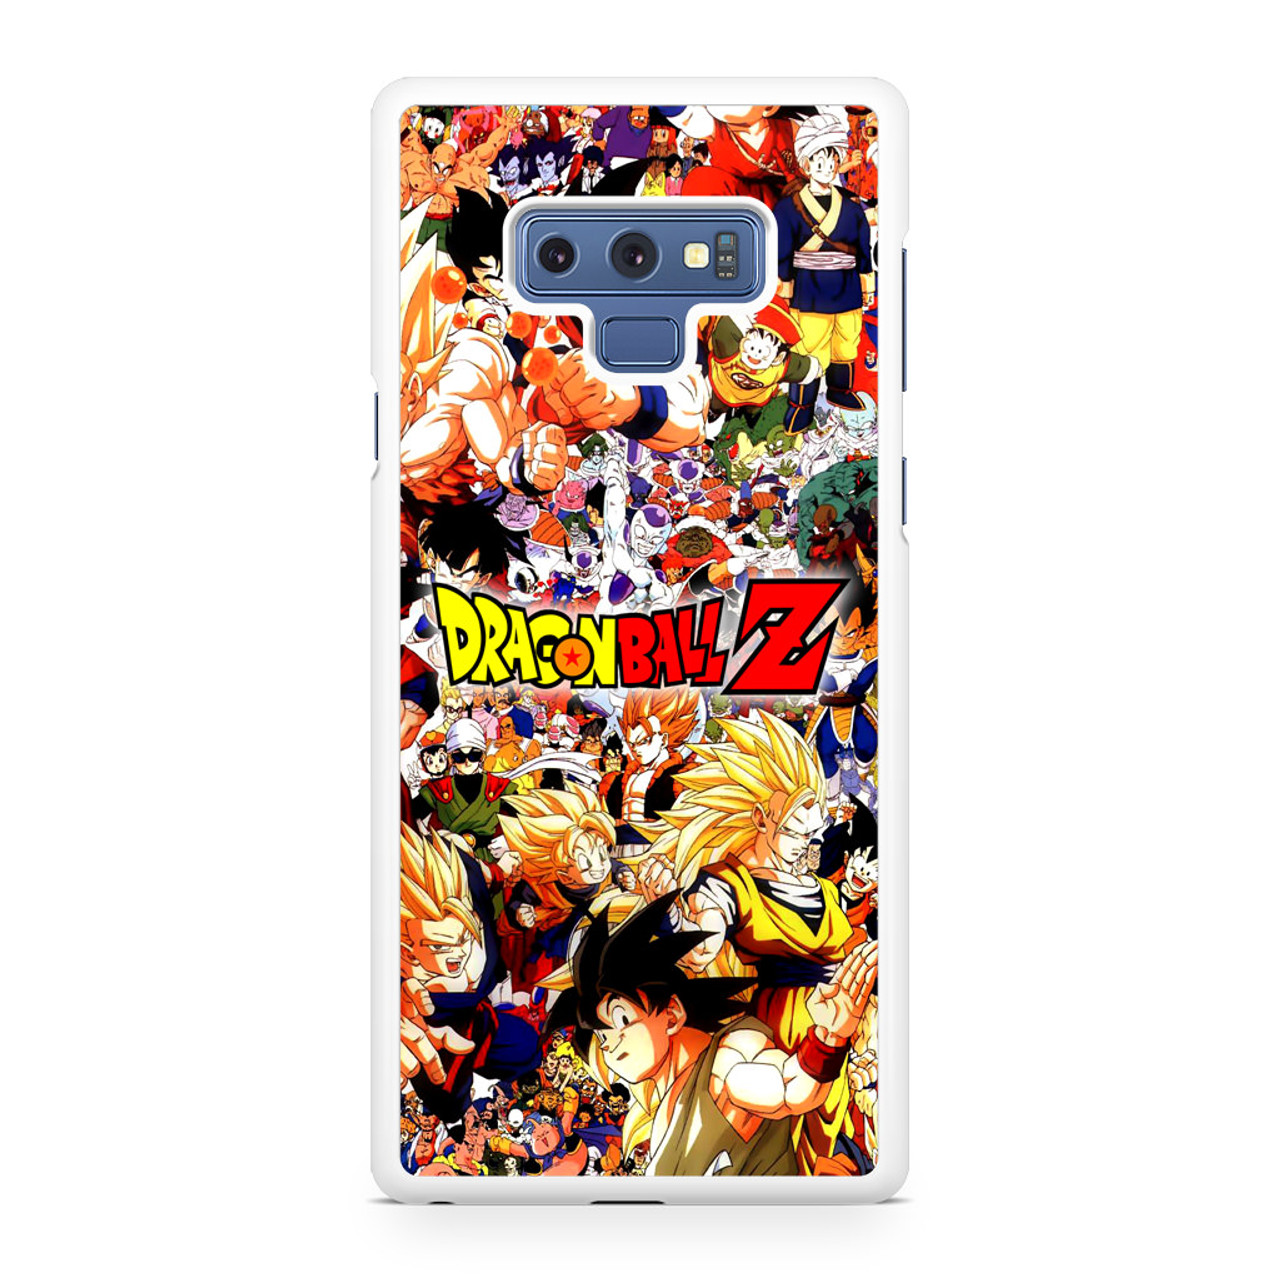 Dragon Ball Z All Characters Samsung Galaxy Note 9 Case Jocases